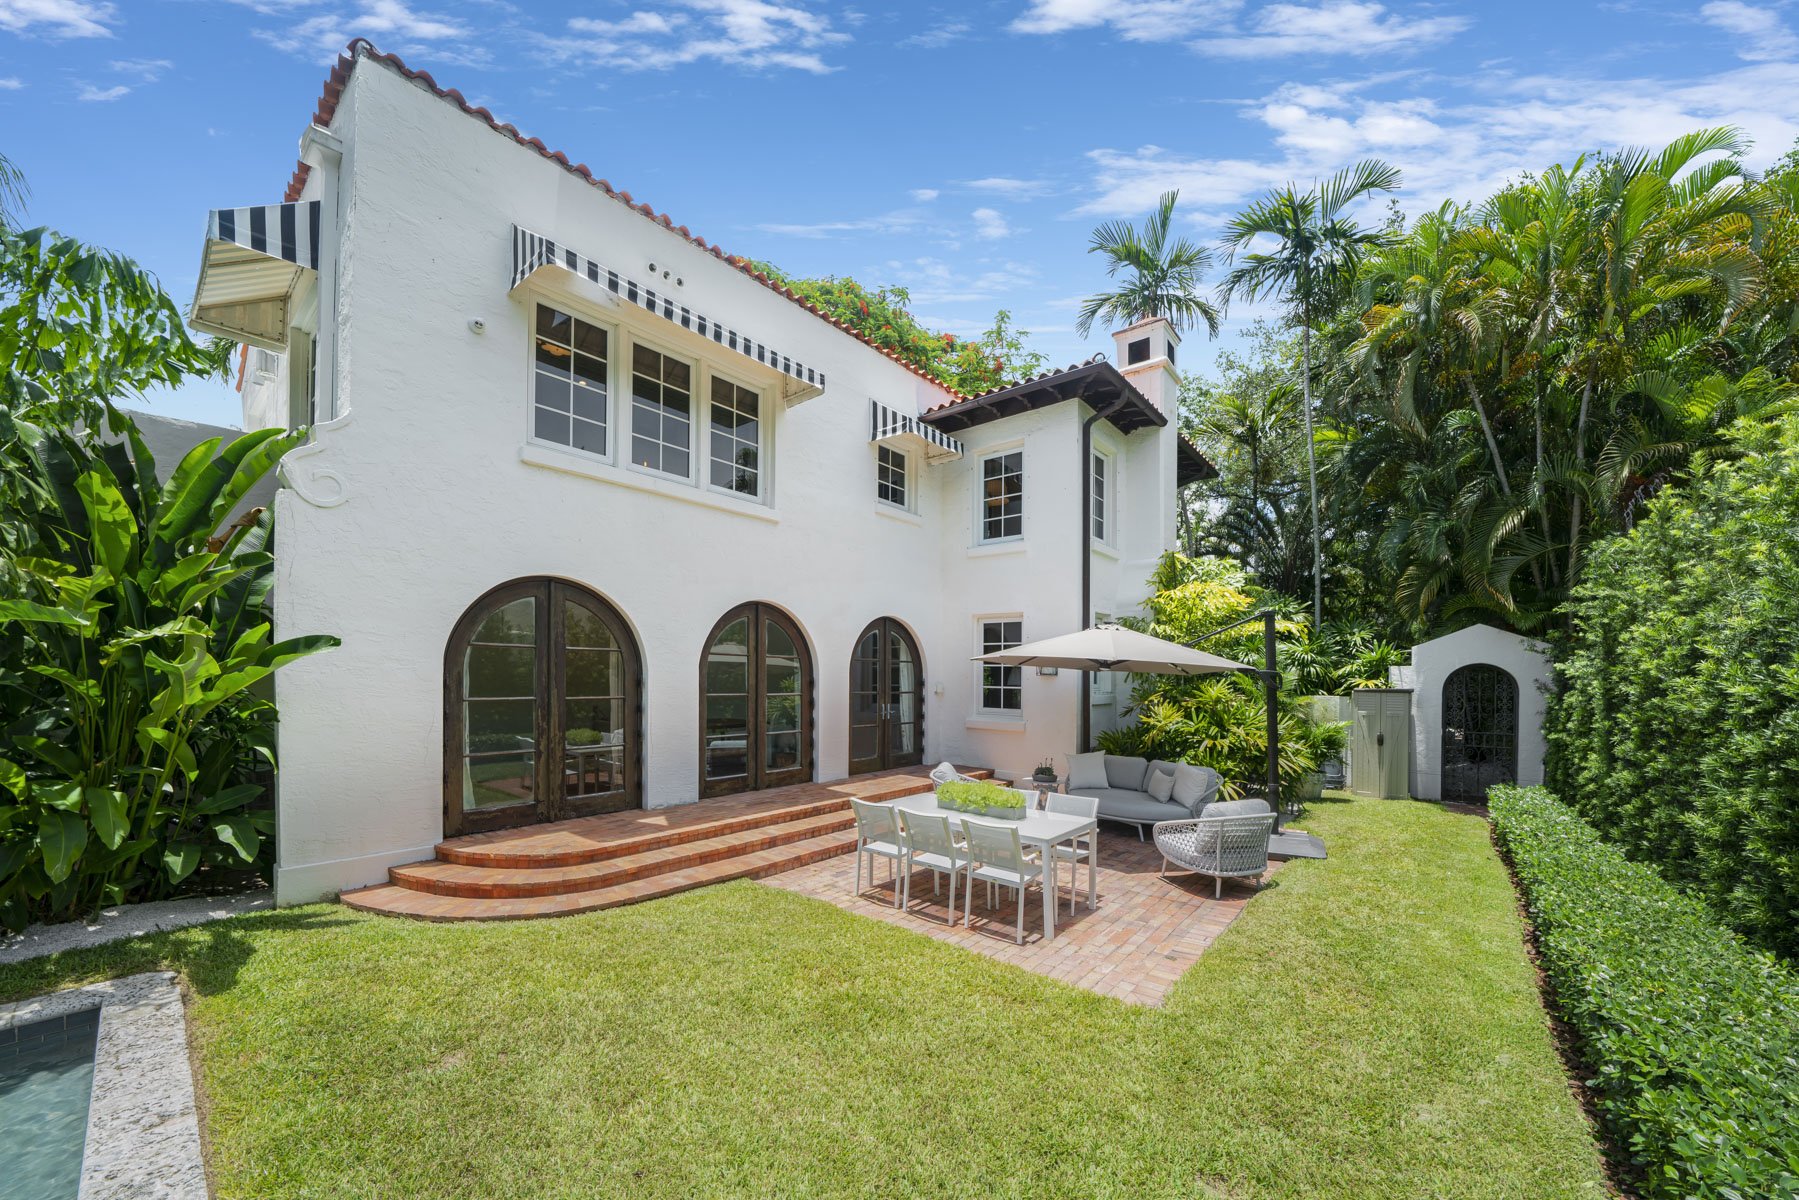 Actor And Producer Christian Slater Sells Classic Coconut Grove Home For $4.258 Million 37.jpg